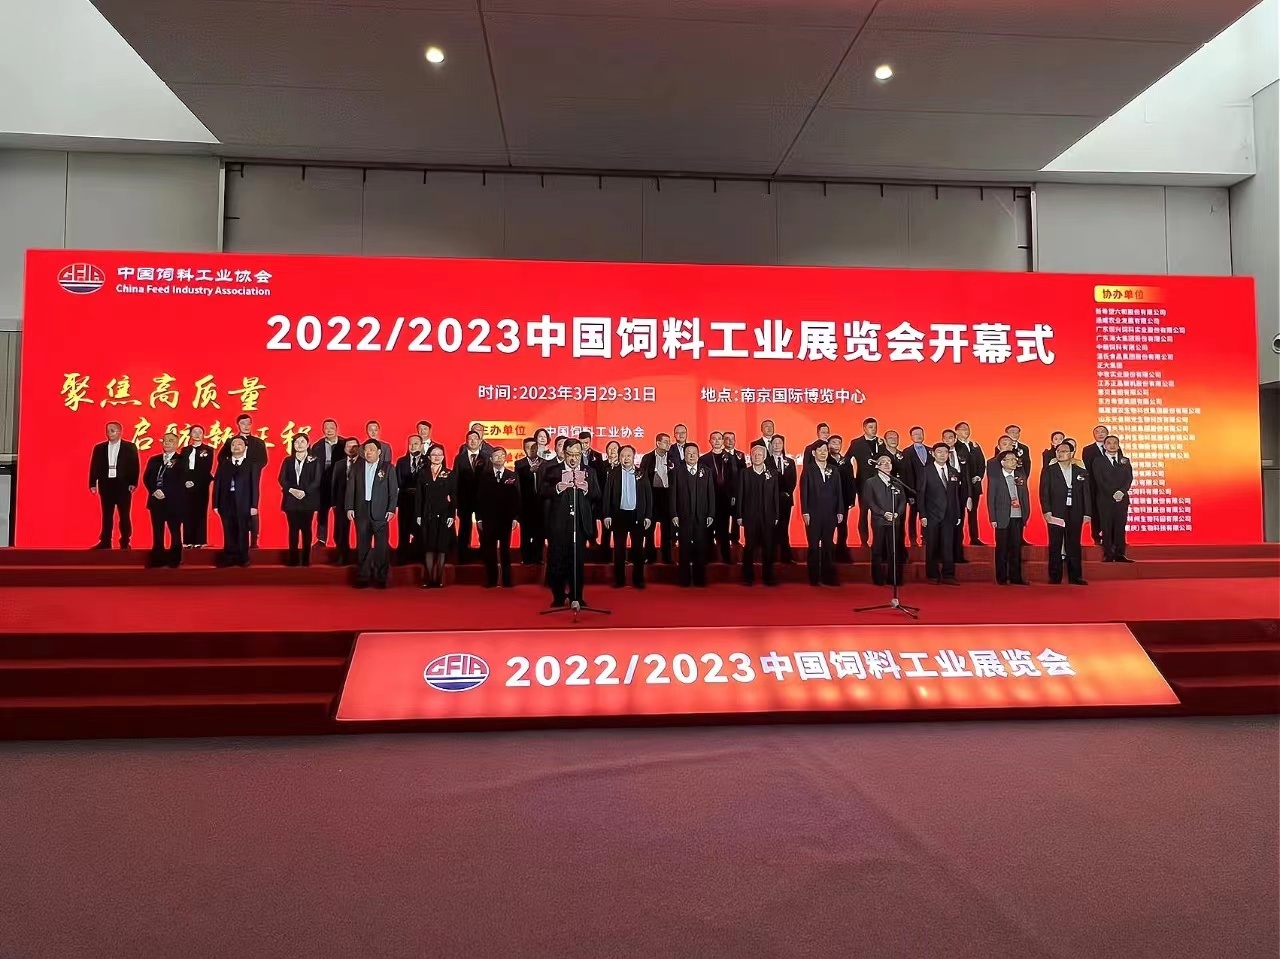 Nature Biological 2022/2023 China Feed Industry Exhibition has come to a successful conclusion!